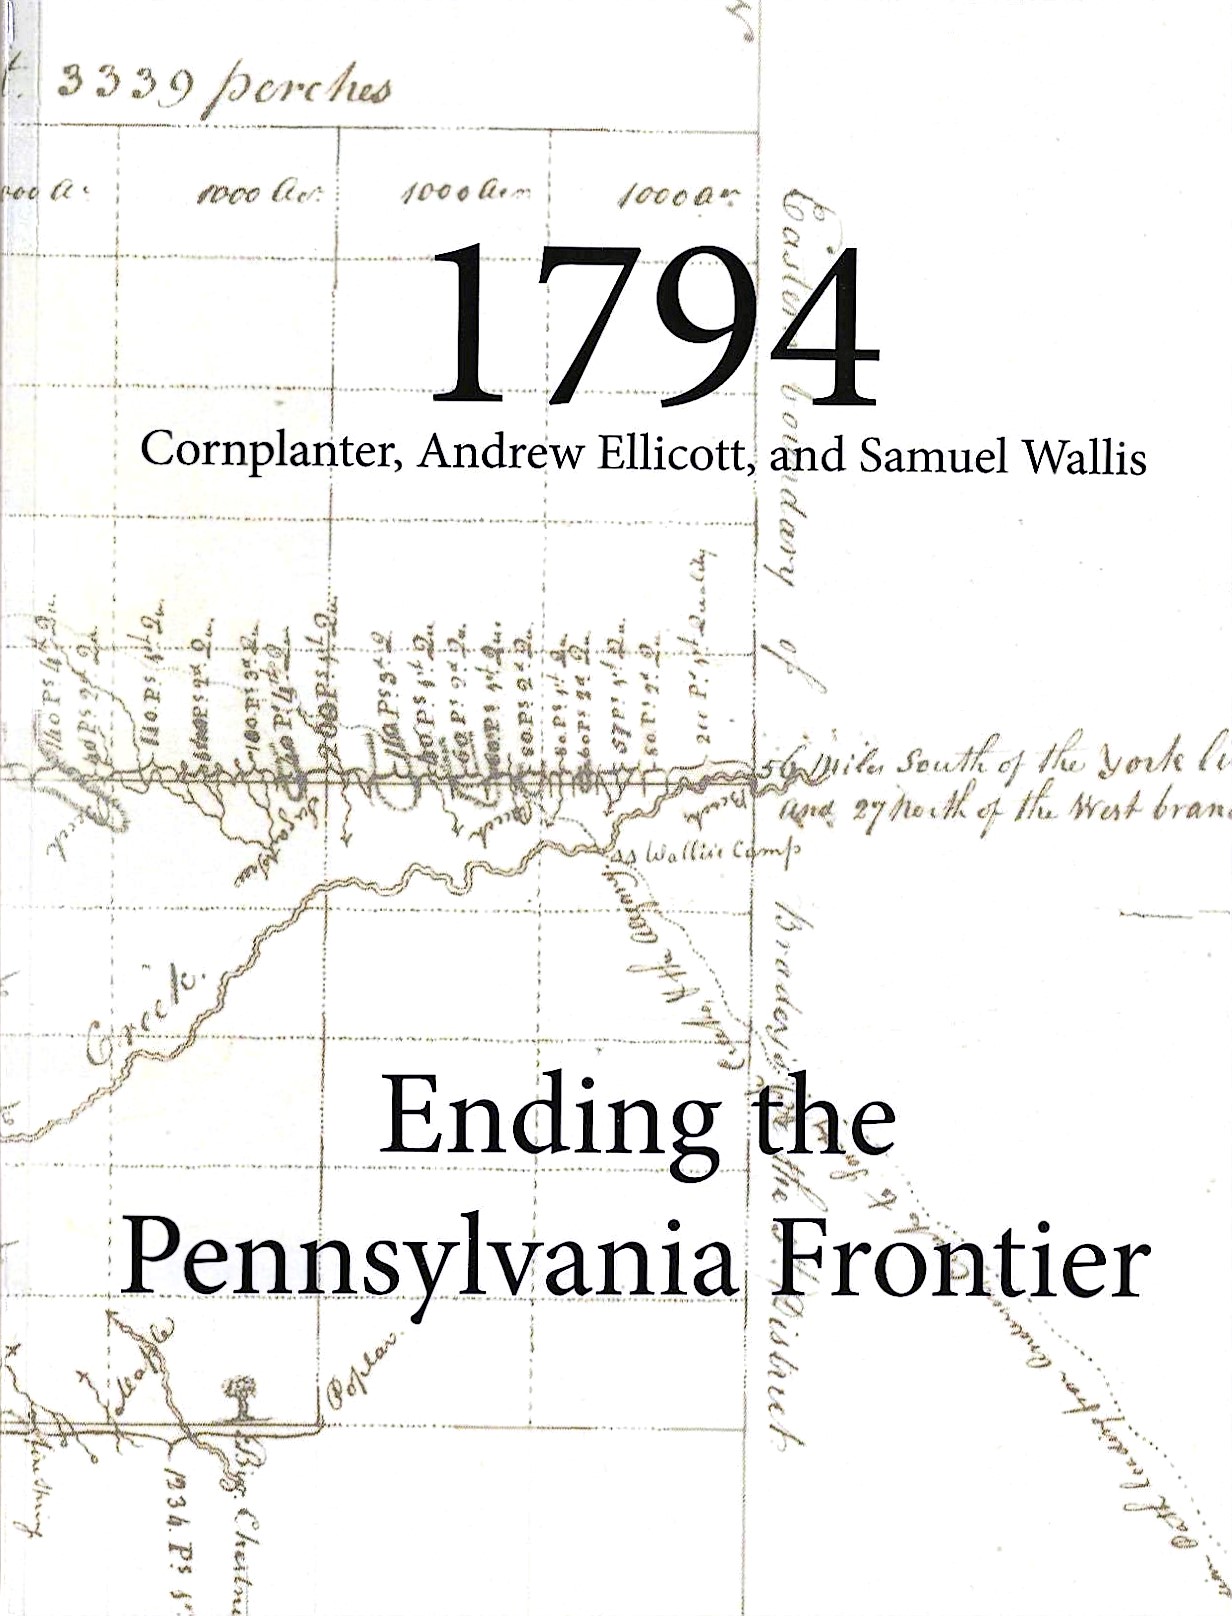 Ending the Pennsylvania Frontier - 1794, by John M. Forcey